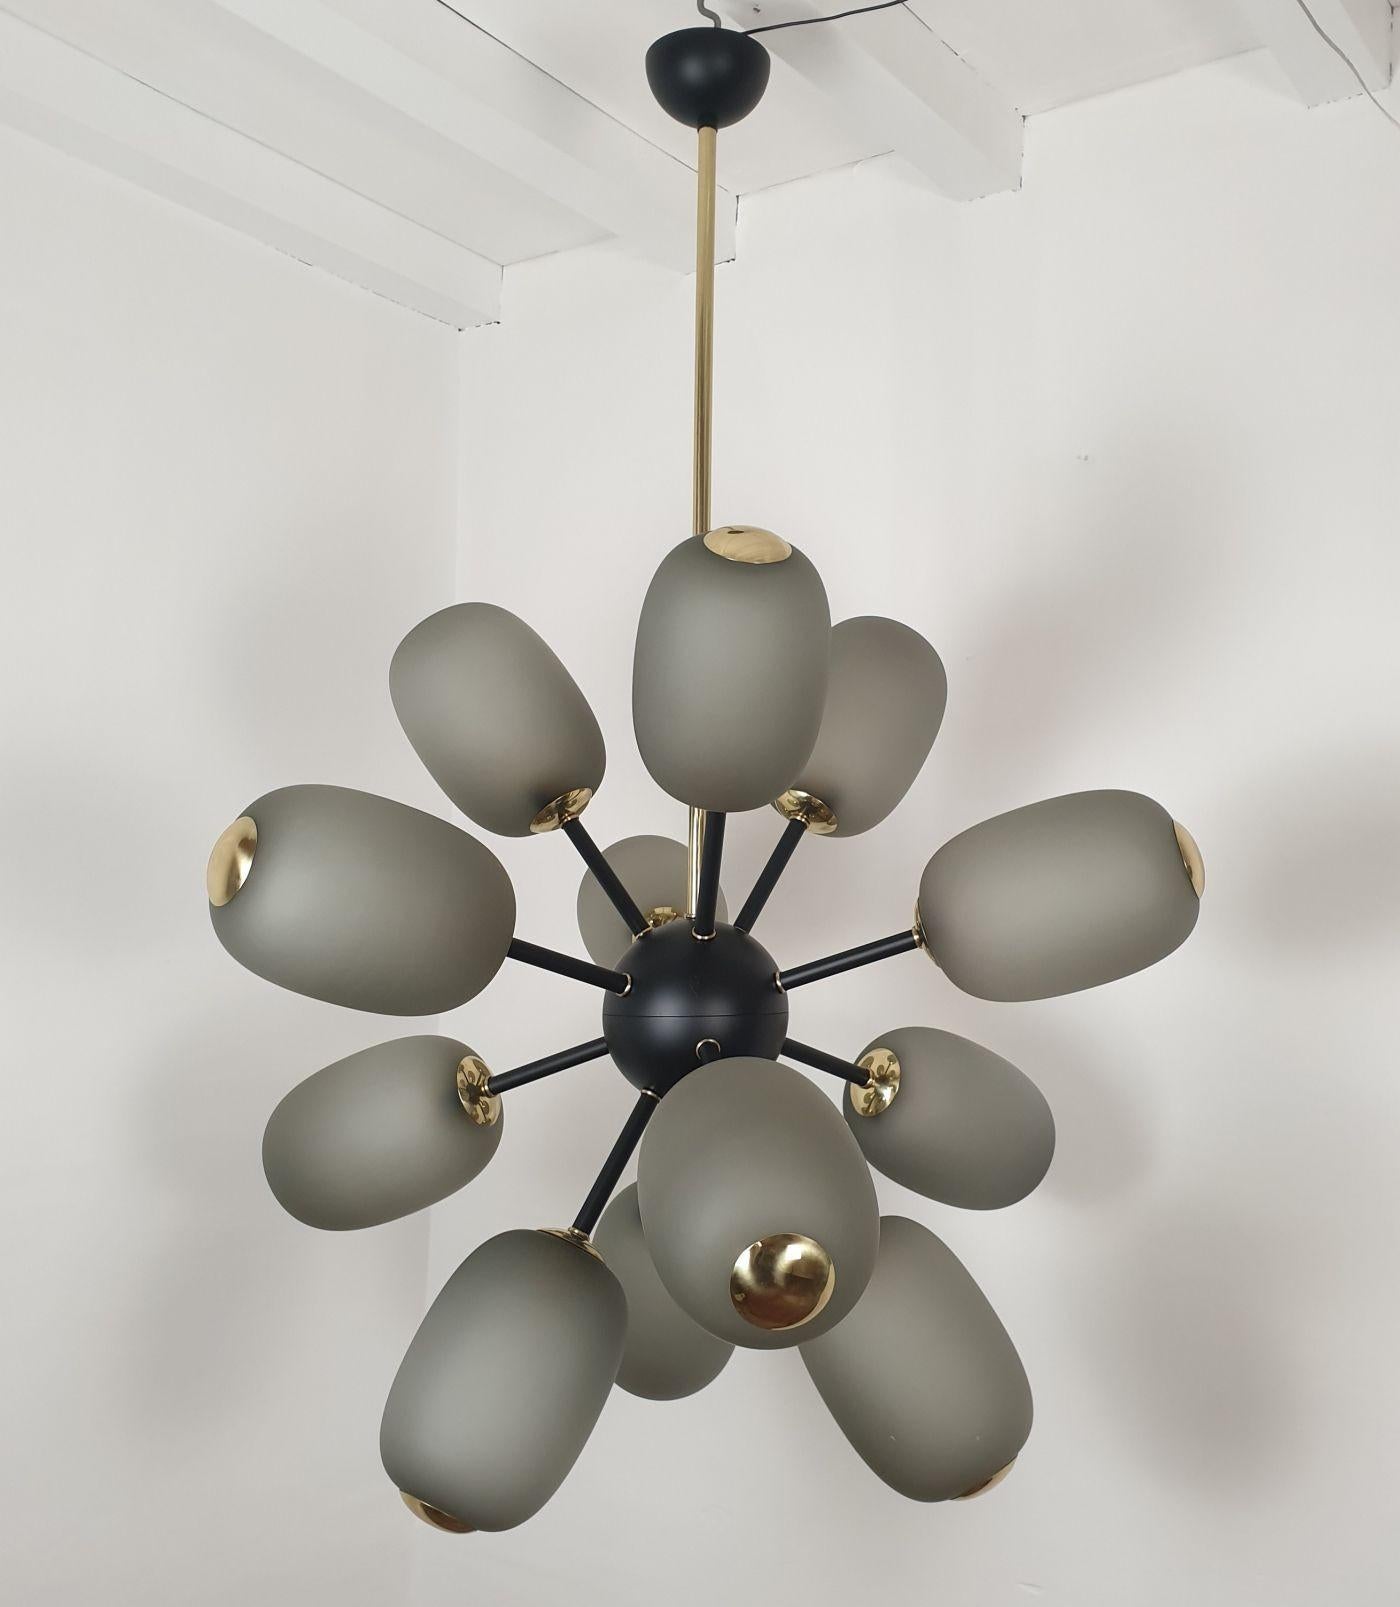 Very large Sputnik chandelier, attributed to Barovier and Toso, Italy 1990s.
The Mid-Century Modern chandelier is made of 12 light-grey Murano glass globes, a black painted frame, and brass elements.
It has 1 light in each glass: 12 in total. 
The